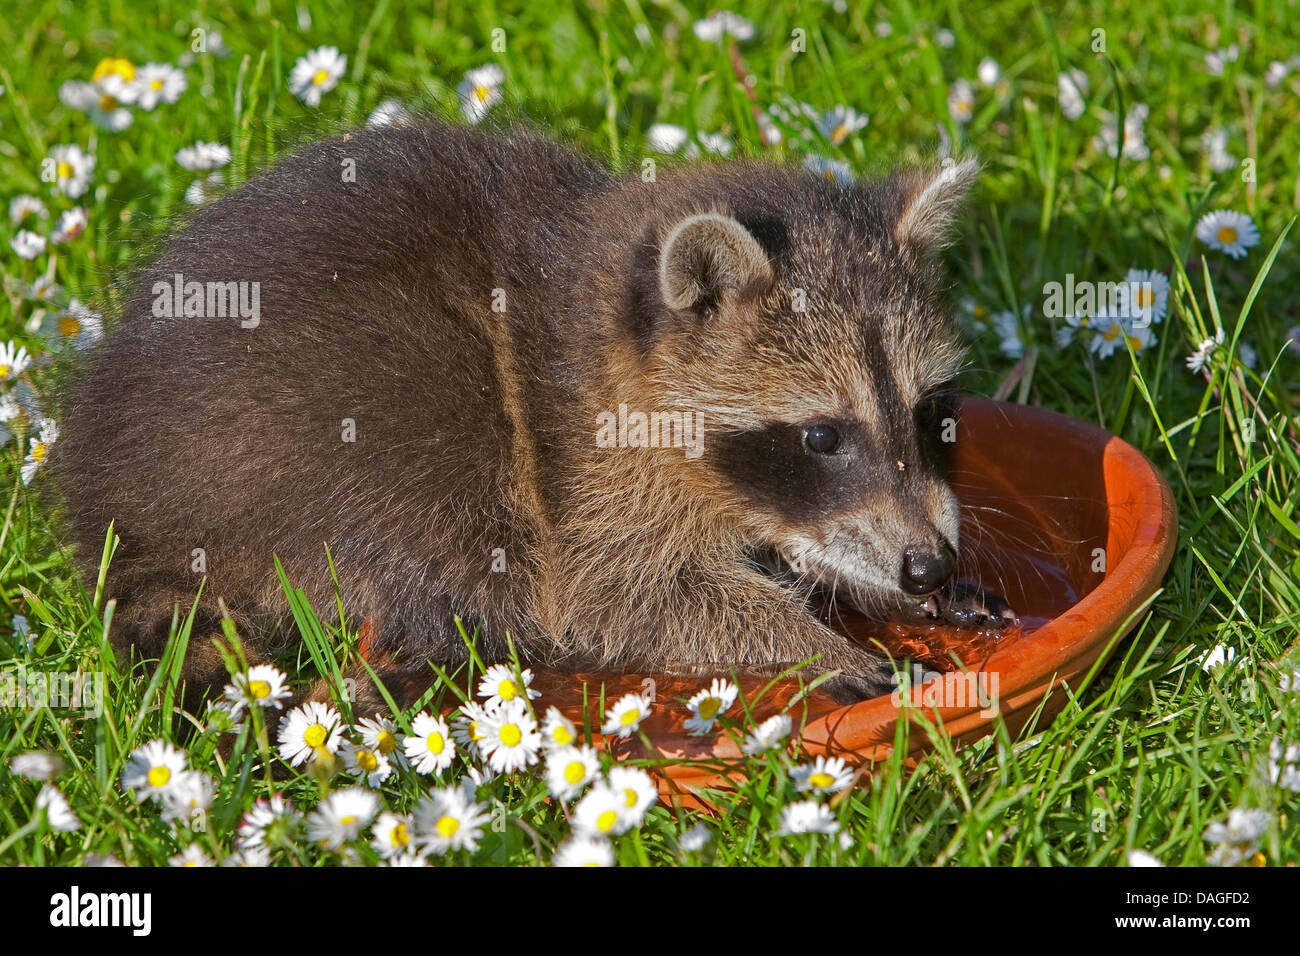 common raccoon (Procyon lotor), gentle upbringing by hand splashing with water in a dish, Germany Stock Photo